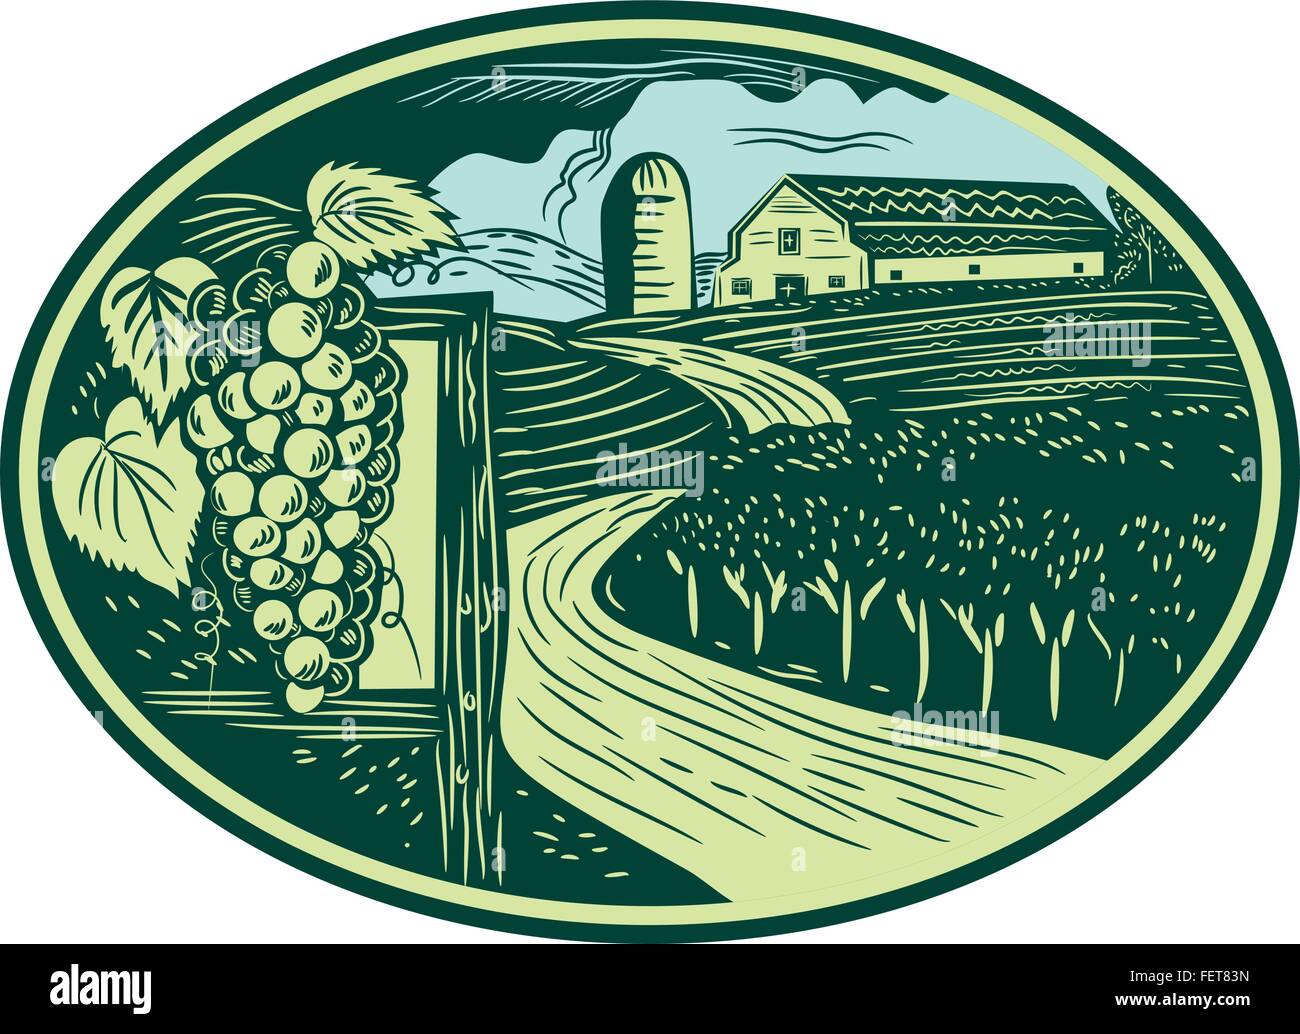 Illustration of a bunch of grapes on vine with leaves with winding road in vineyard or winery and barn farmhouse in background set inside oval shape done in retro woodcut style. Stock Vector